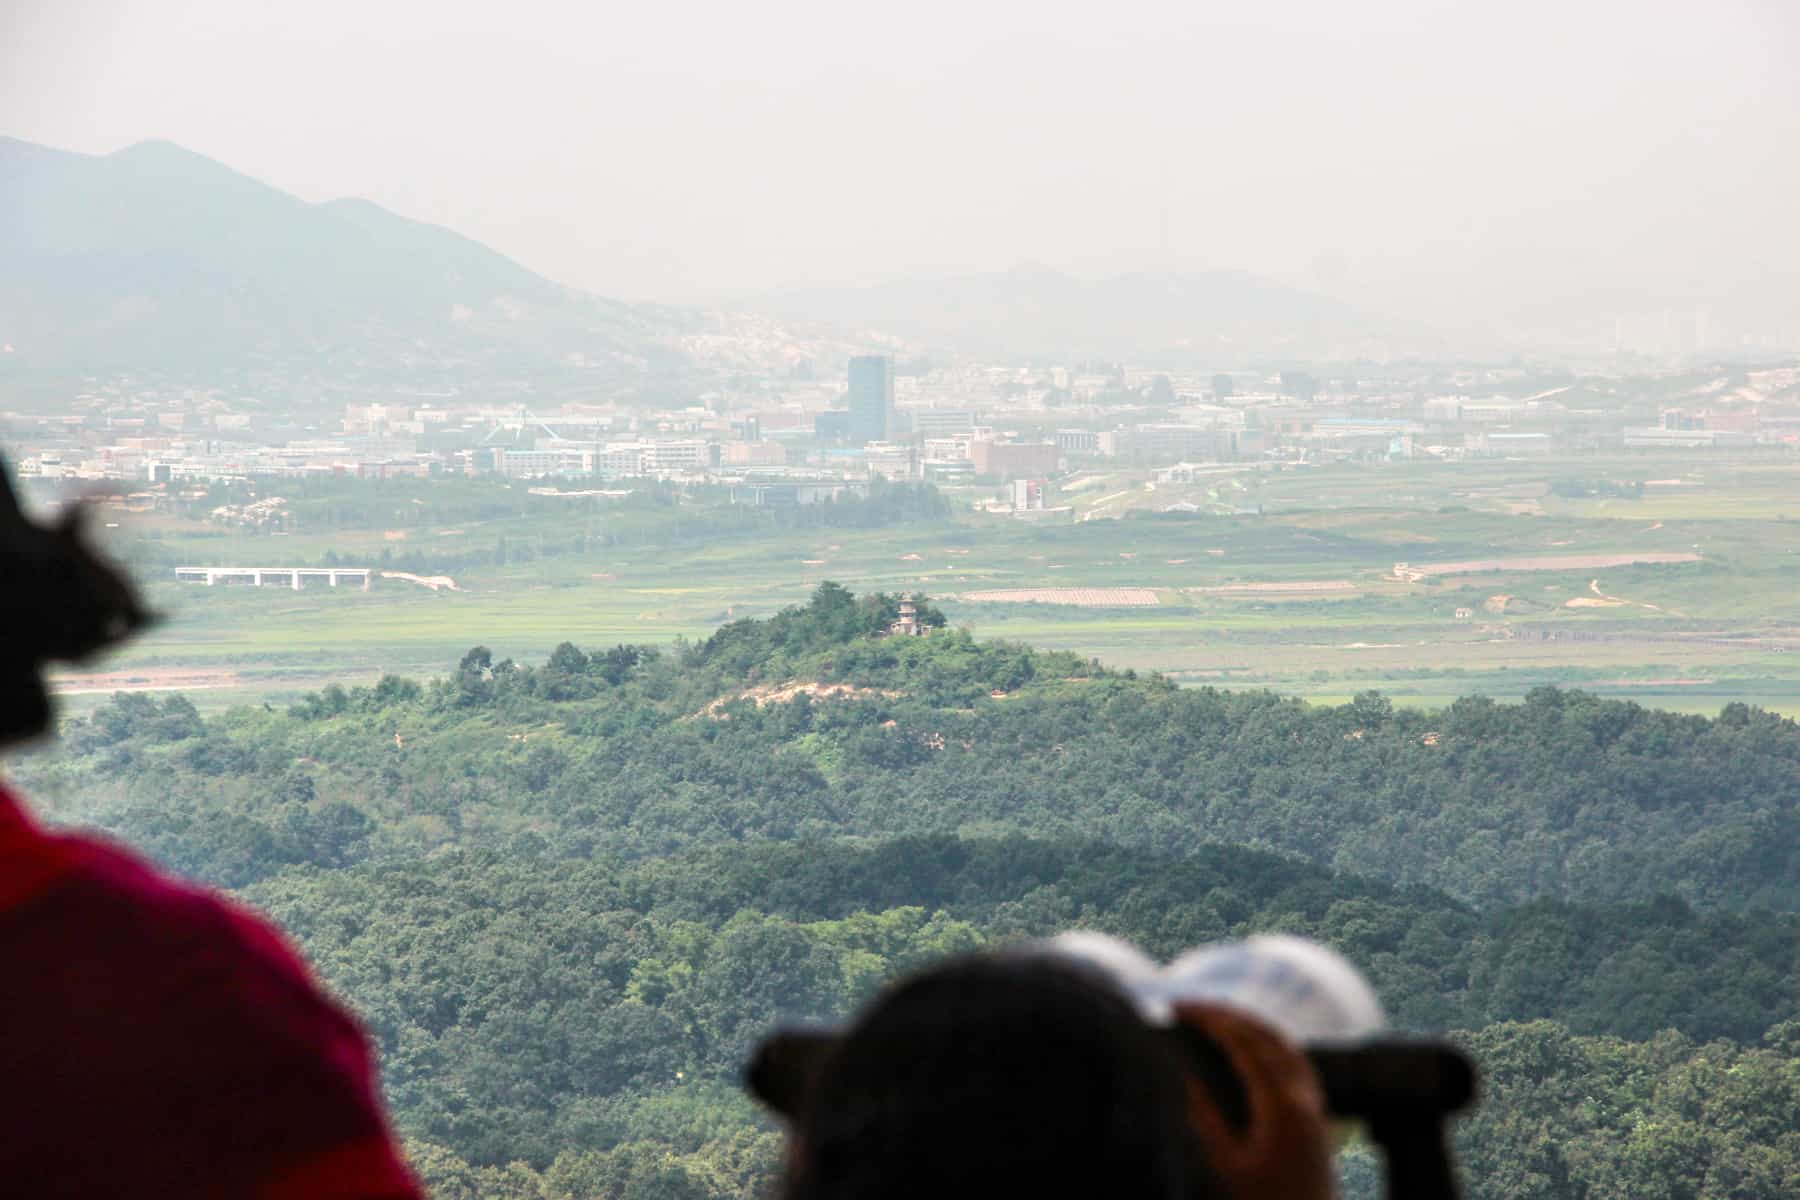 A view past the binoculars towards a green mound and the 'Propaganda Village' in North Korea, seen on a trip to the DMZ.